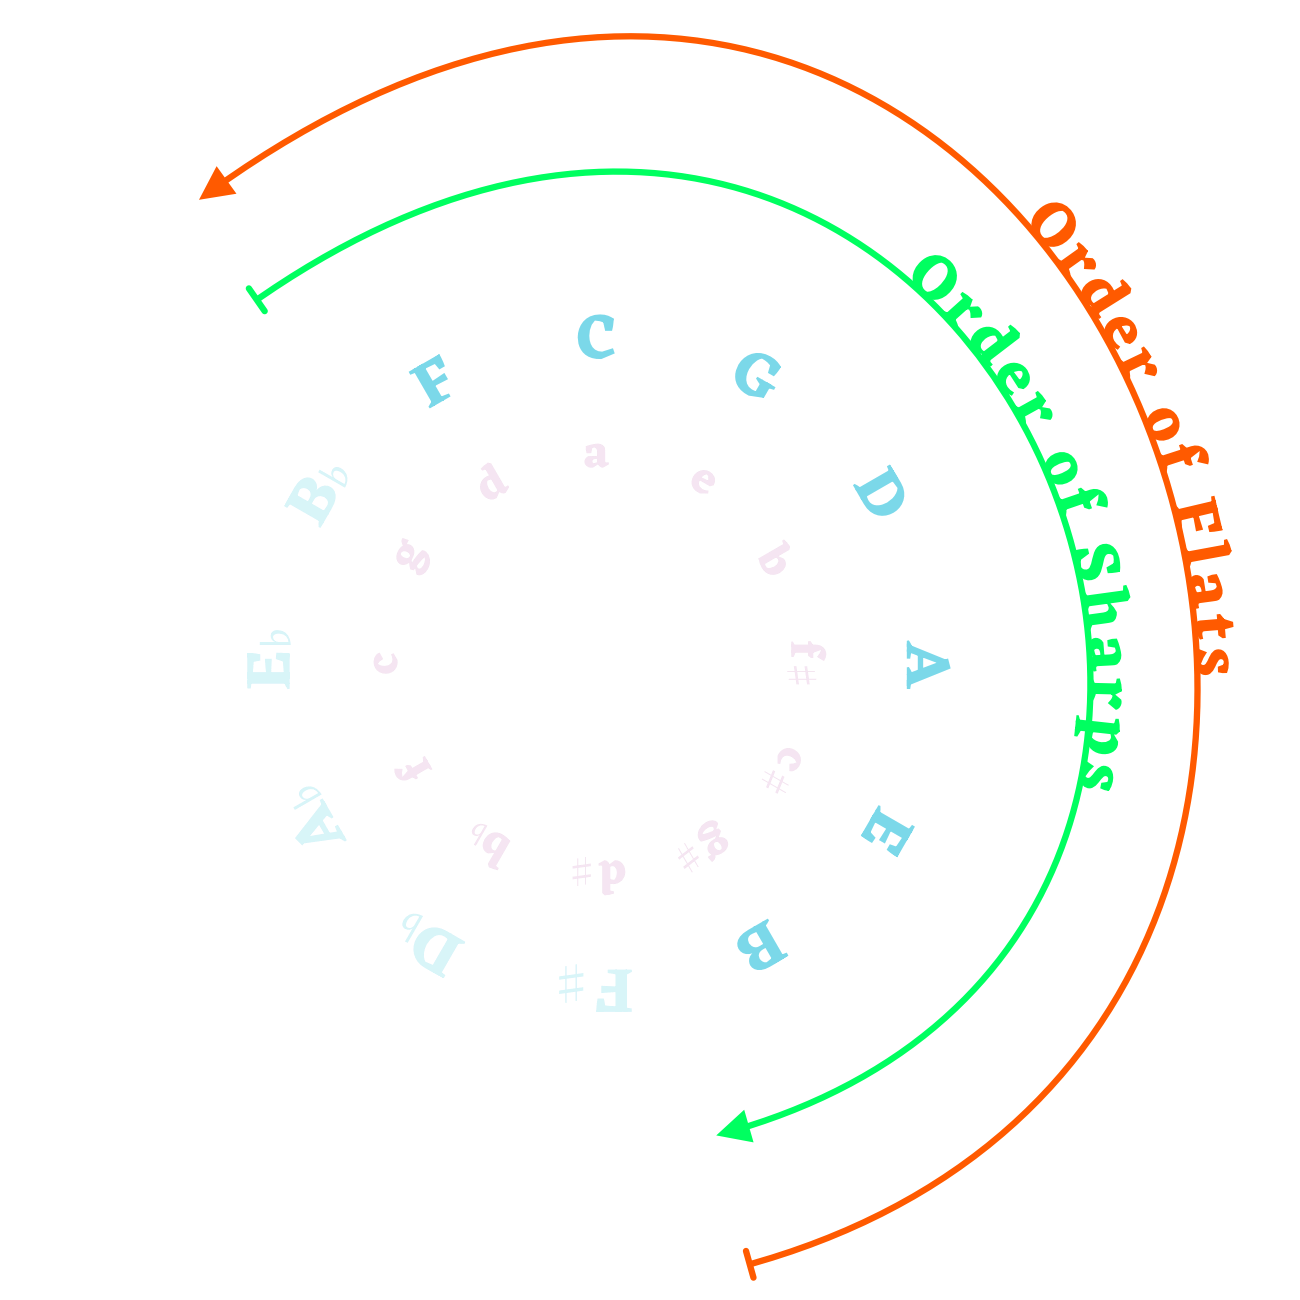 Circle of Fifth graphics showing the order of sharps and flats